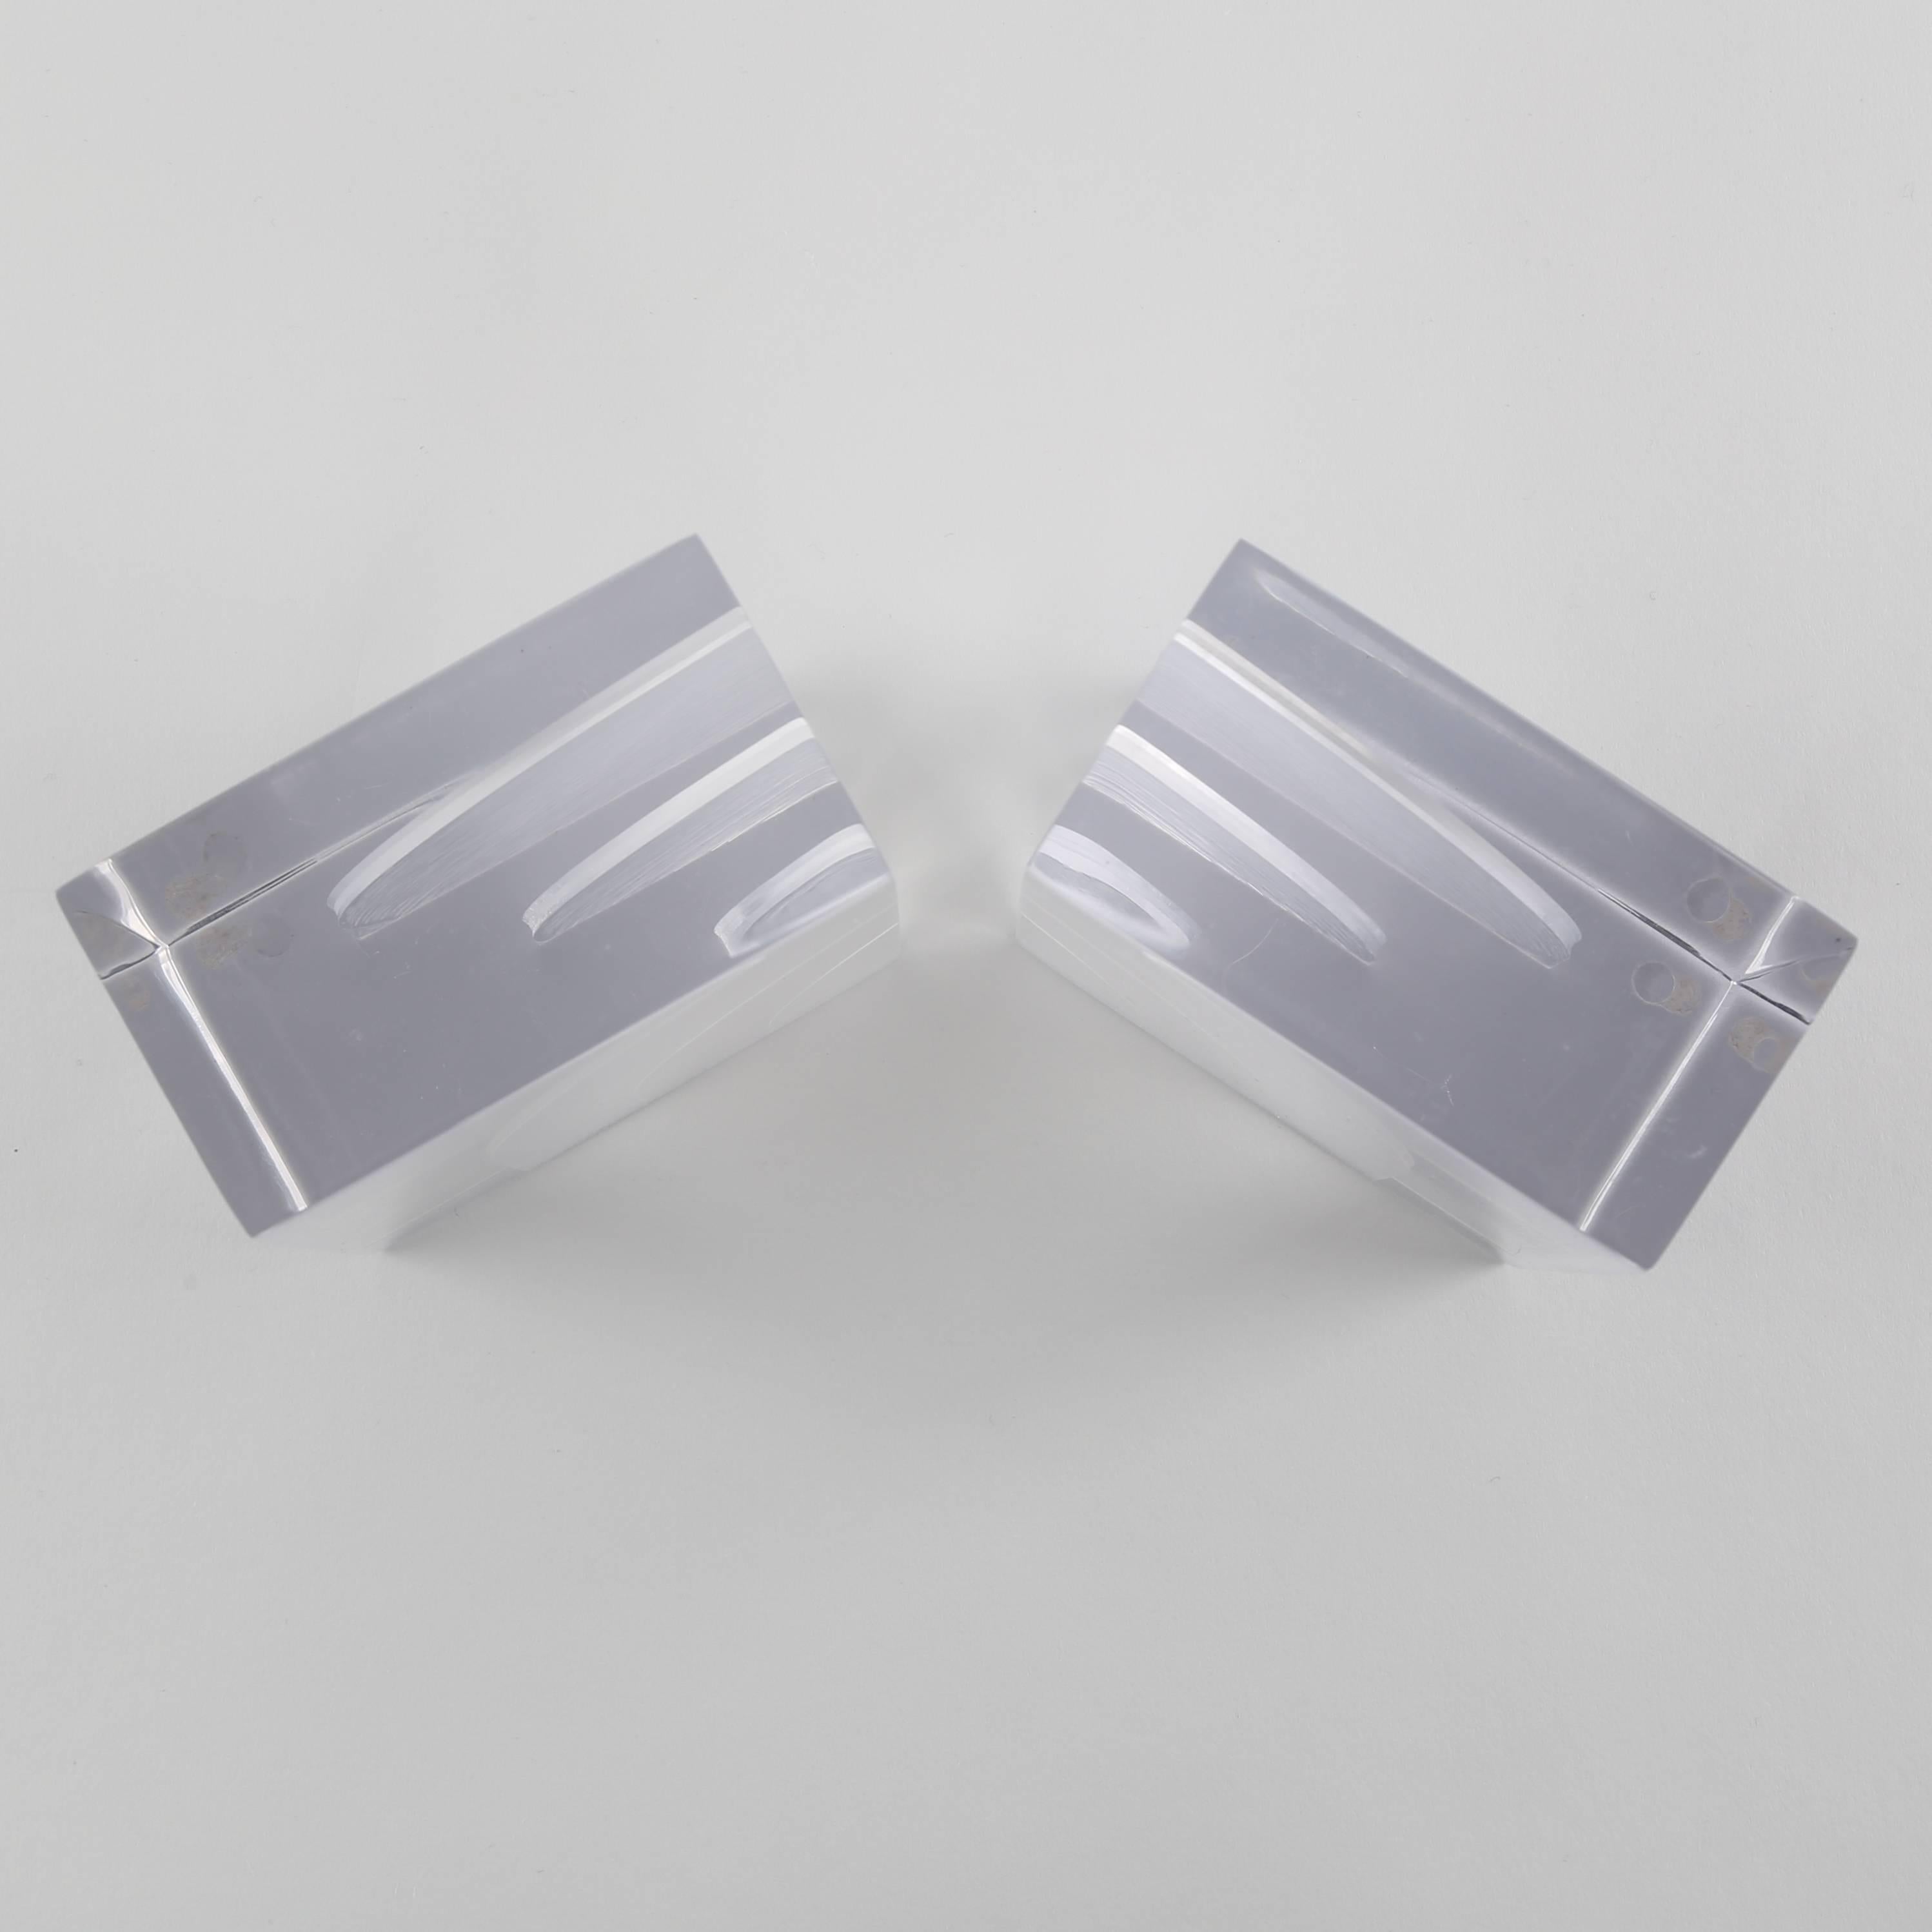 Polished Pair of Thick Lucite Bookends with Internal Sawed Designs